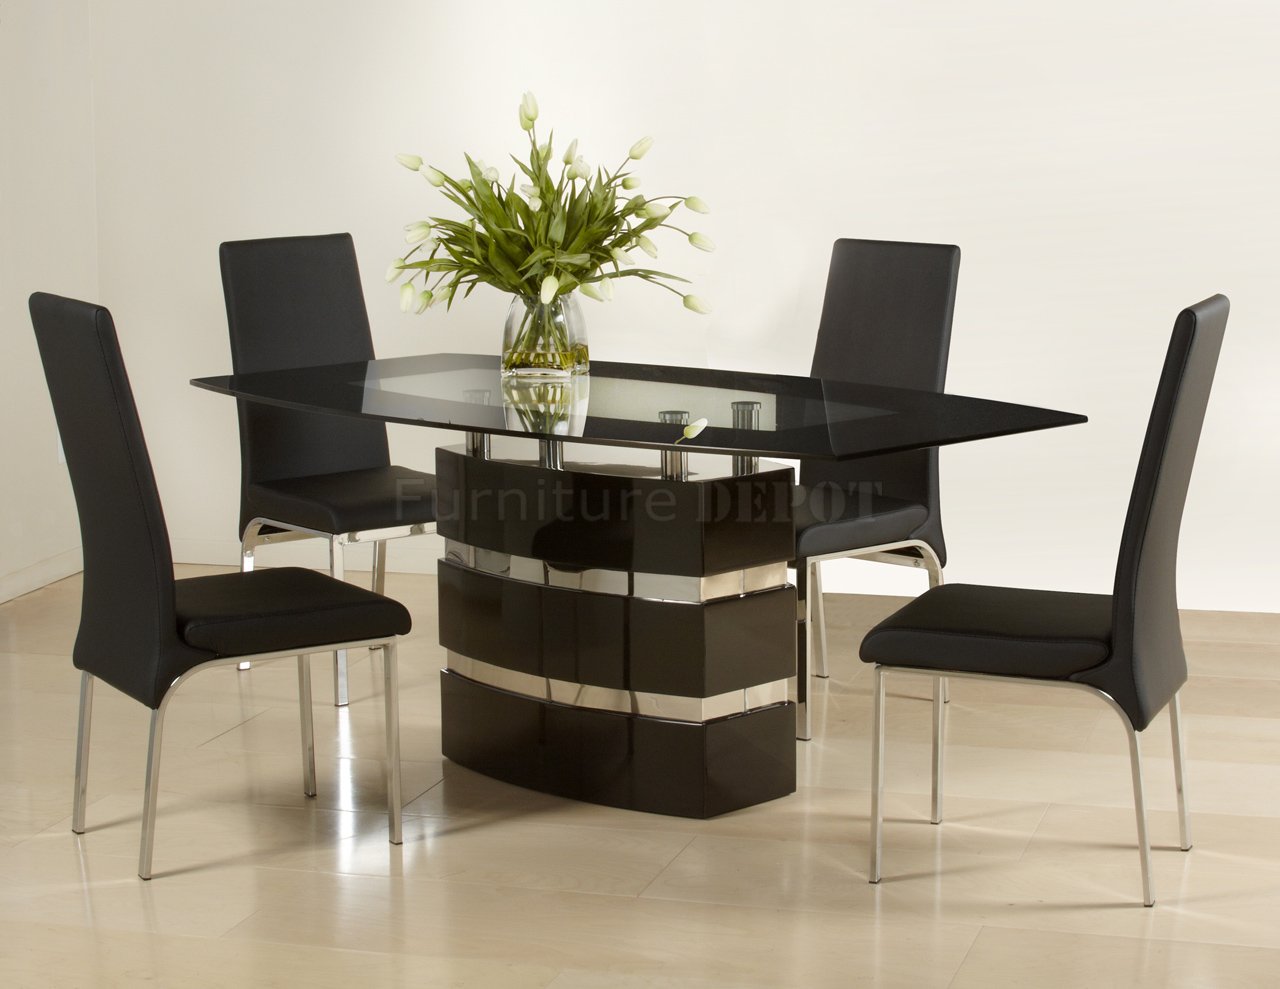 modern dining tables and chairs photo - 6